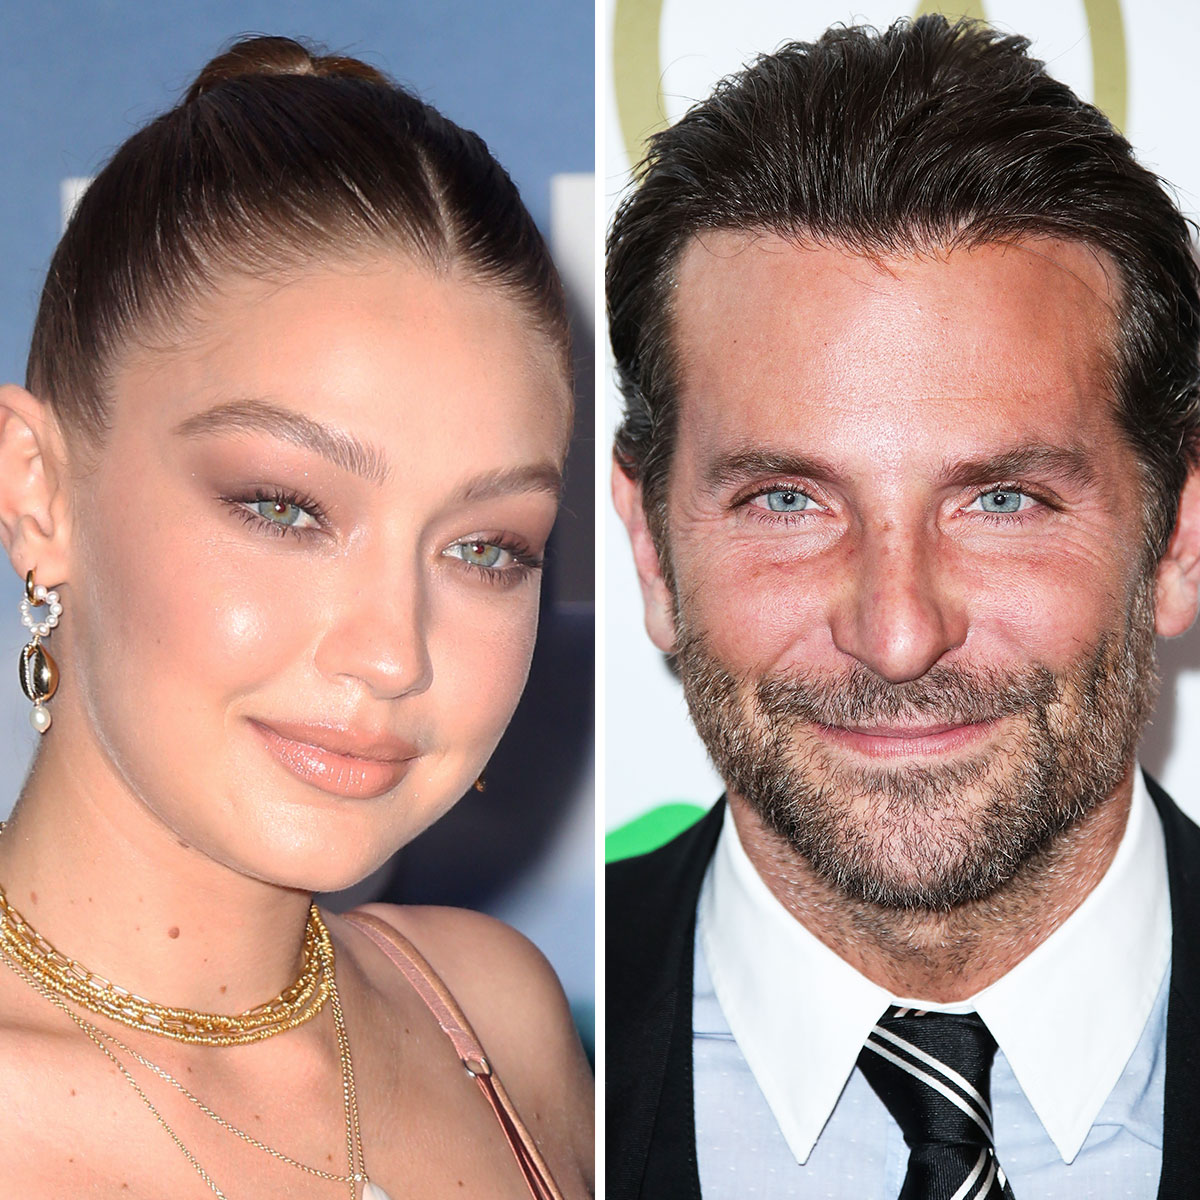 Fans Slam Gigi Hadid And Bradley Cooper's 20-Year Age Gap: 'He Could Be Her  Dad' And 'Feels A Bit Like Grooming' - SHEfinds